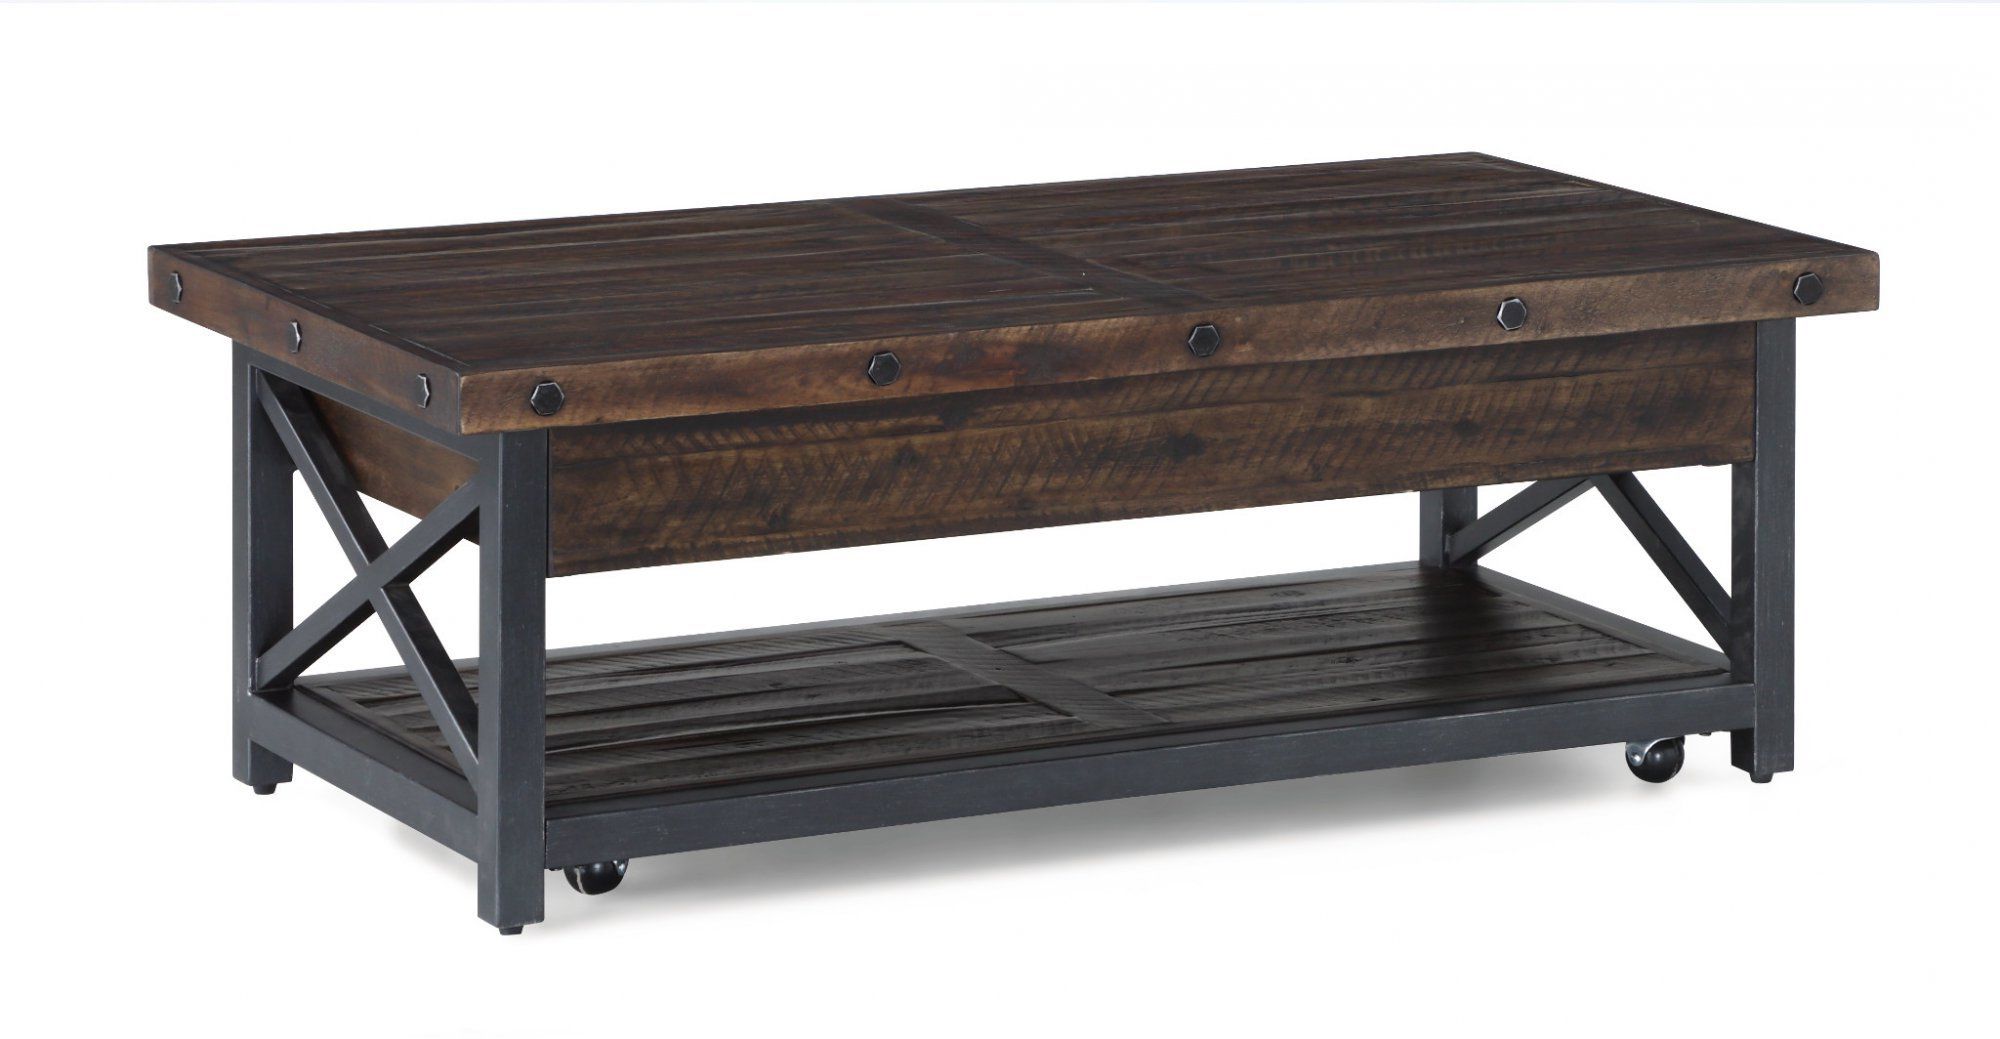 Carpenter Rectangular Lift Top Coffee Table W/casters 6722 0311 Inside Coffee Tables With Casters (Gallery 12 of 20)